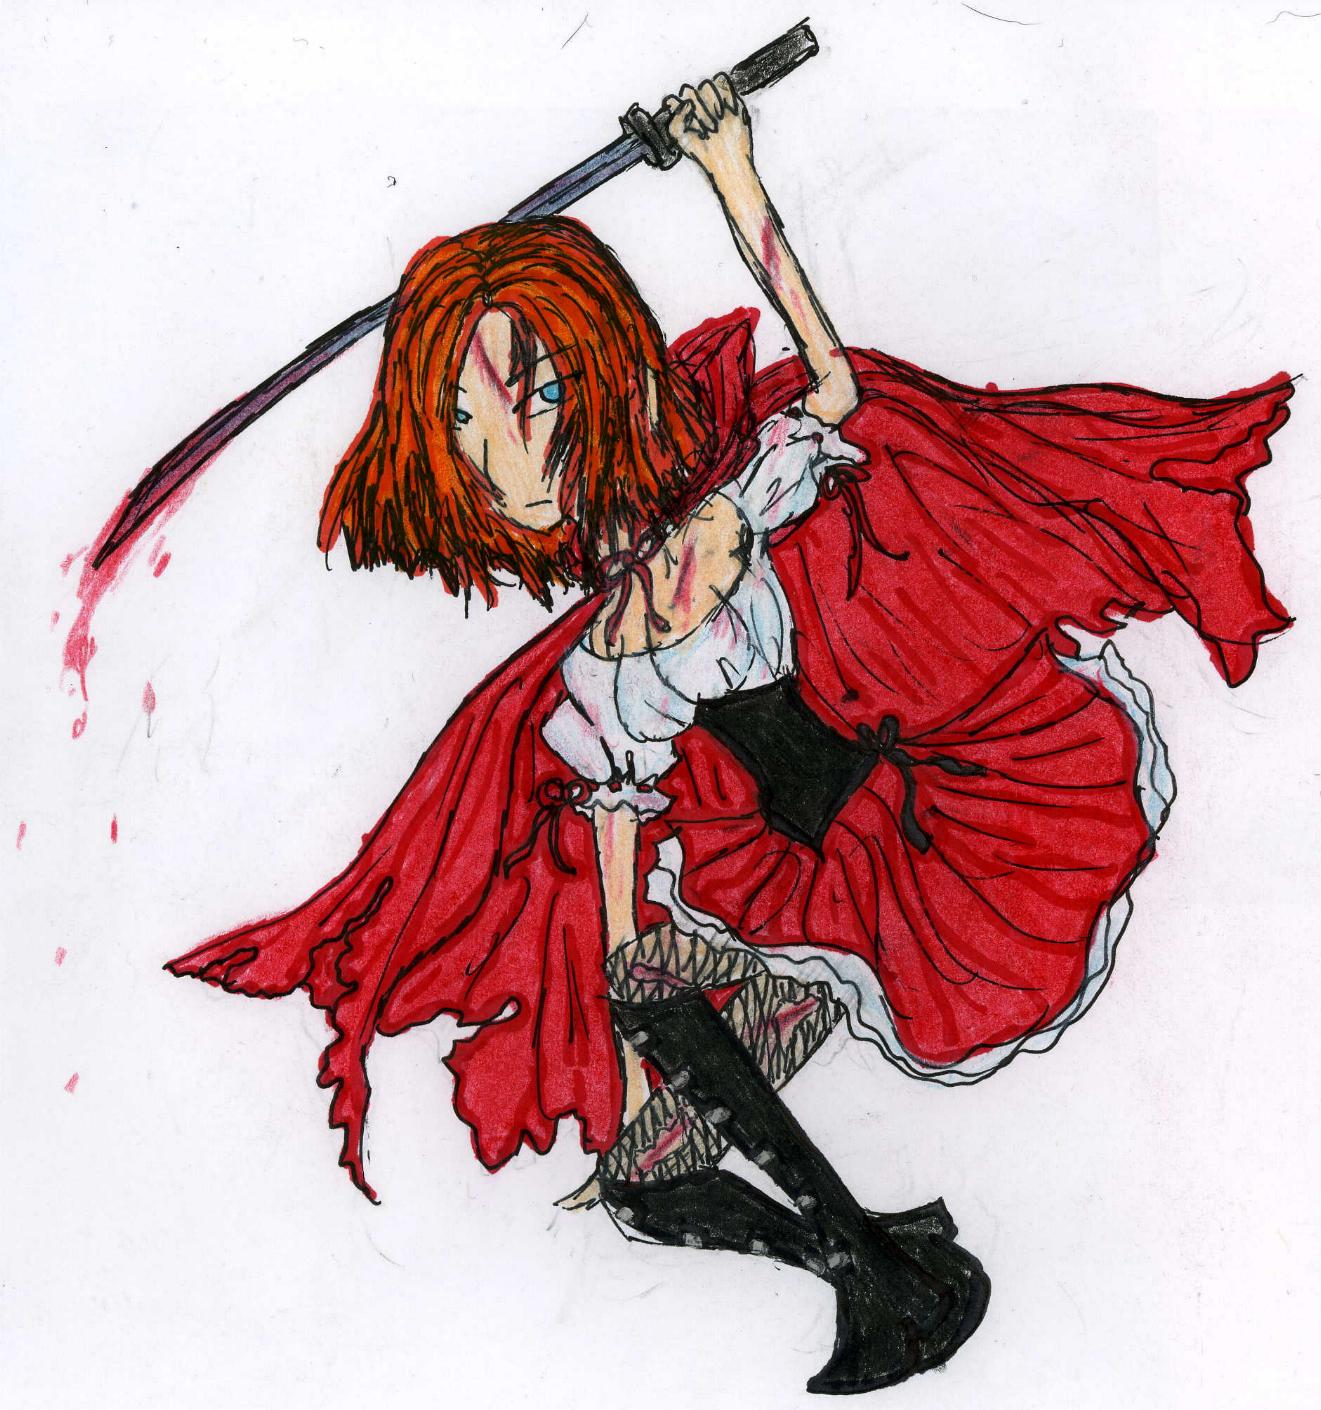 A Homicidal Red Riding Hood by Evil_Summoner